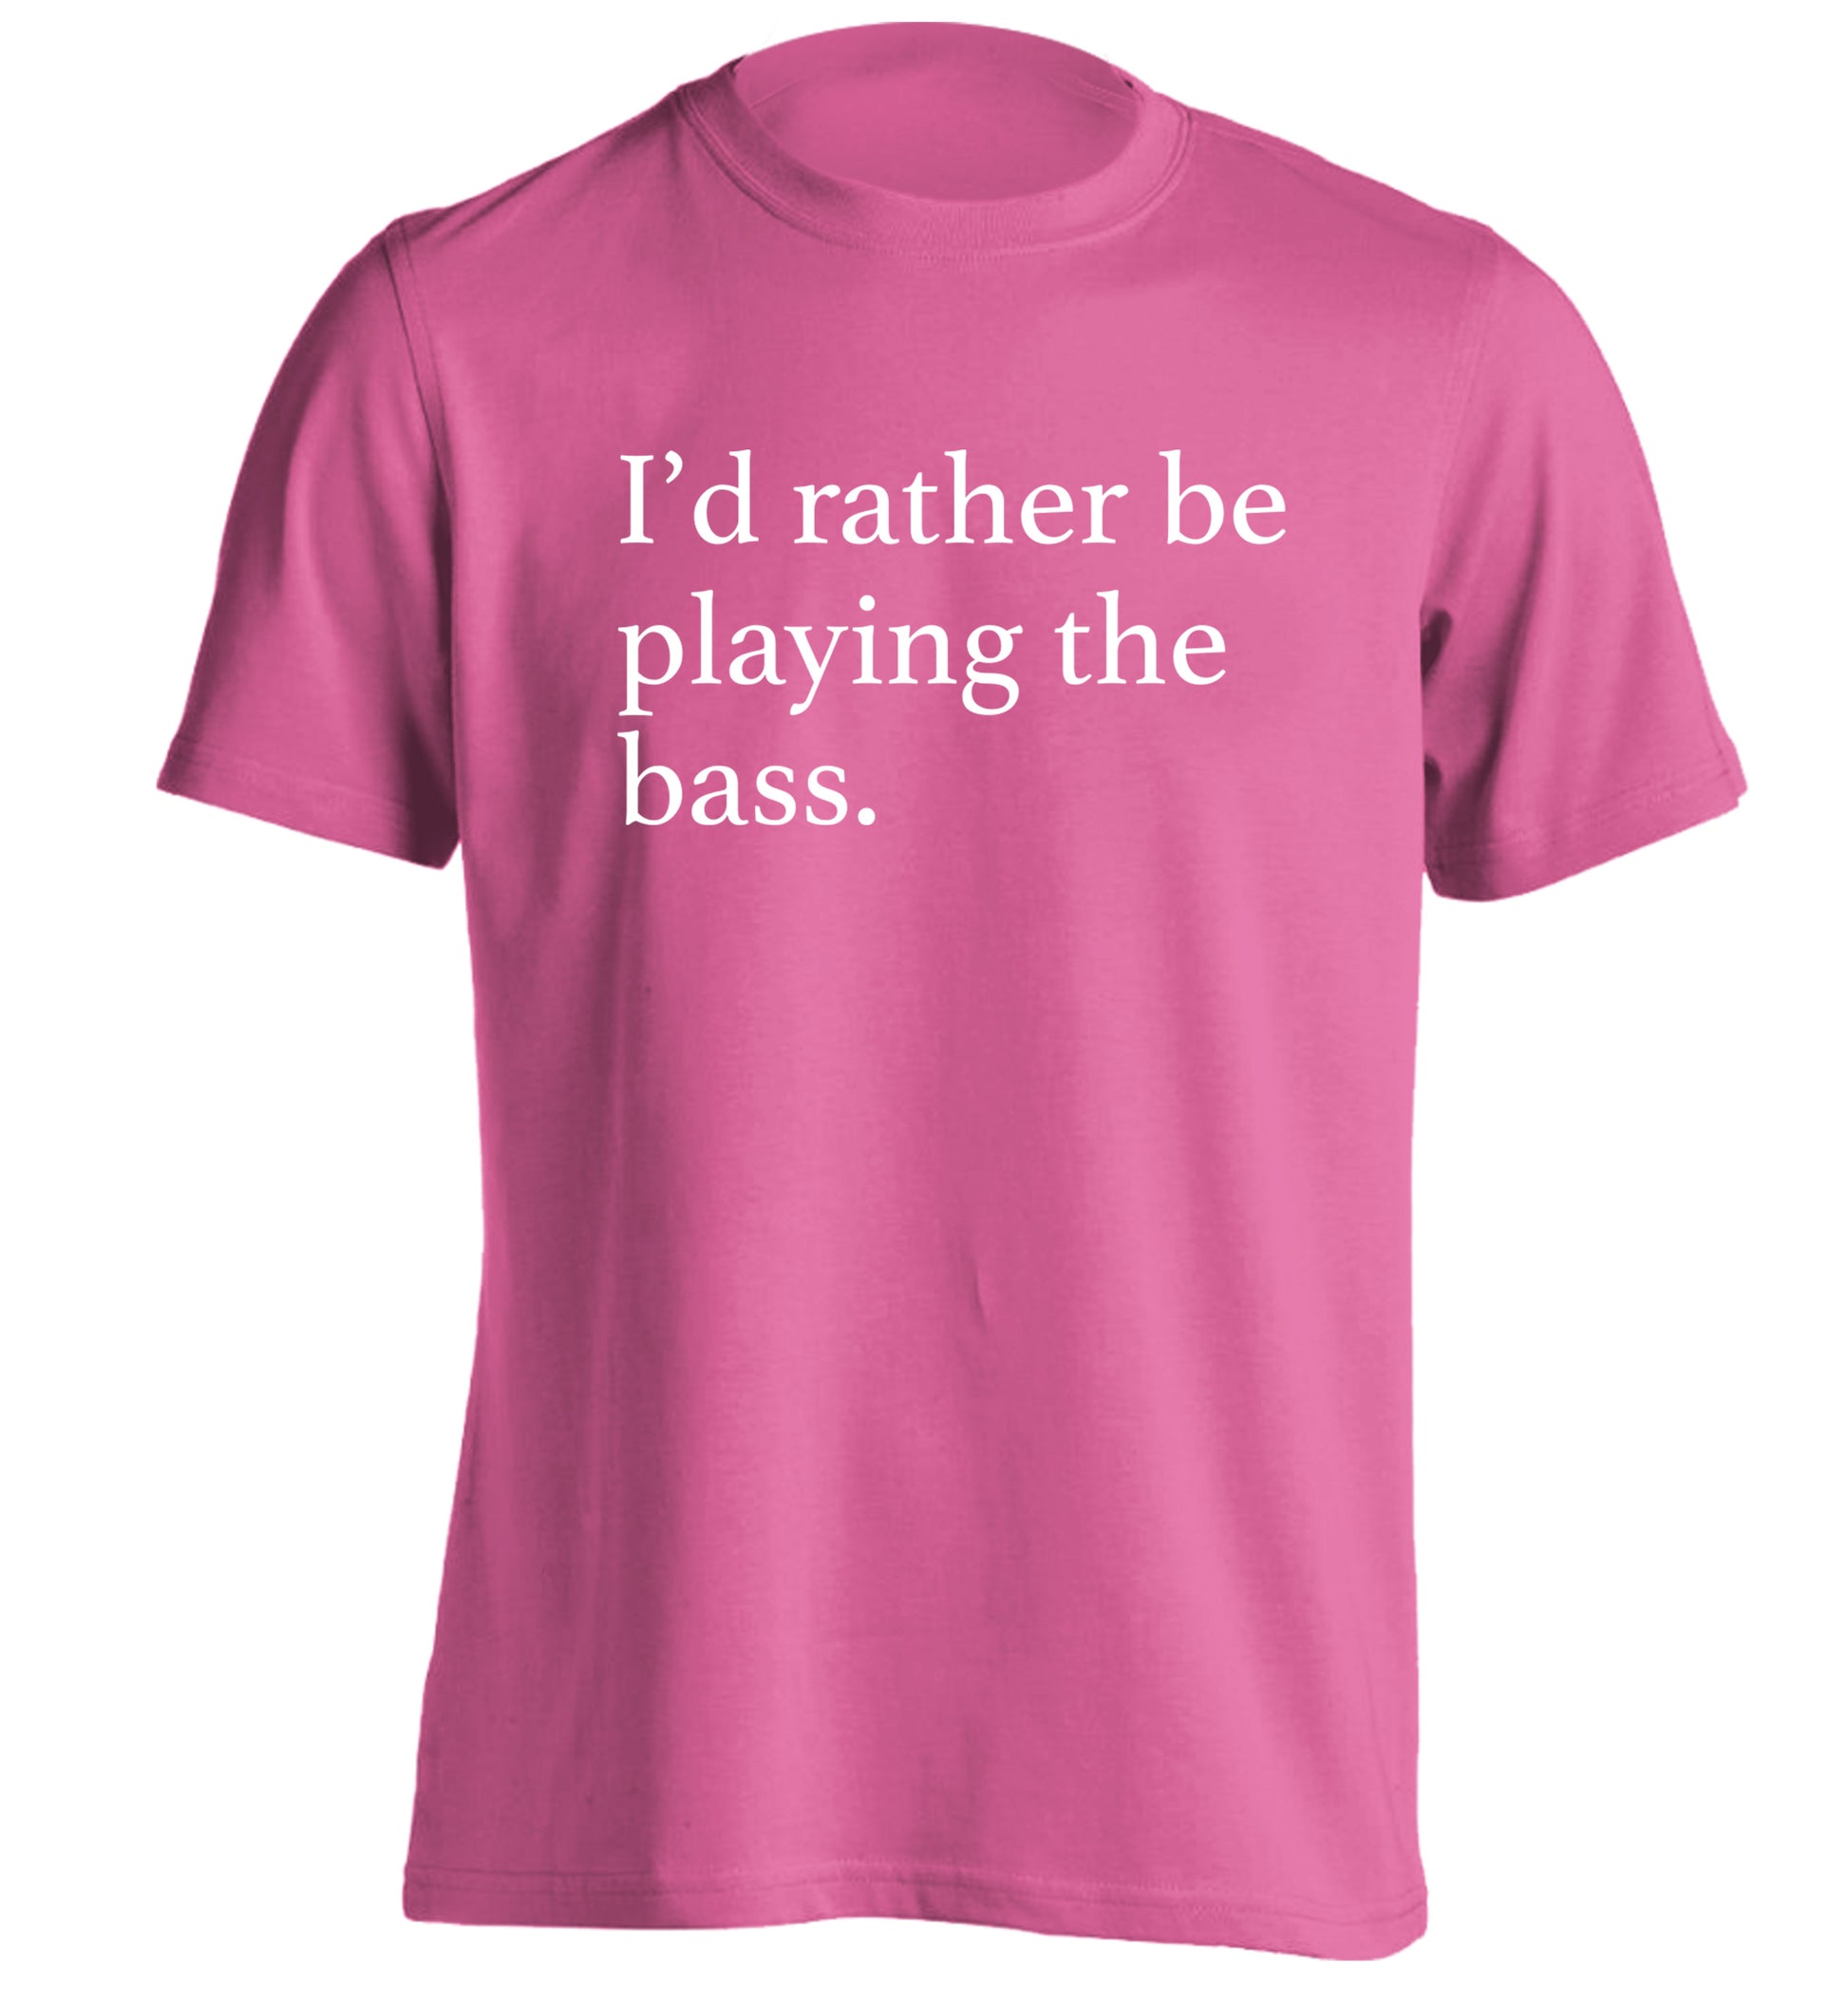 I'd rather by playing the bass adults unisex pink Tshirt 2XL